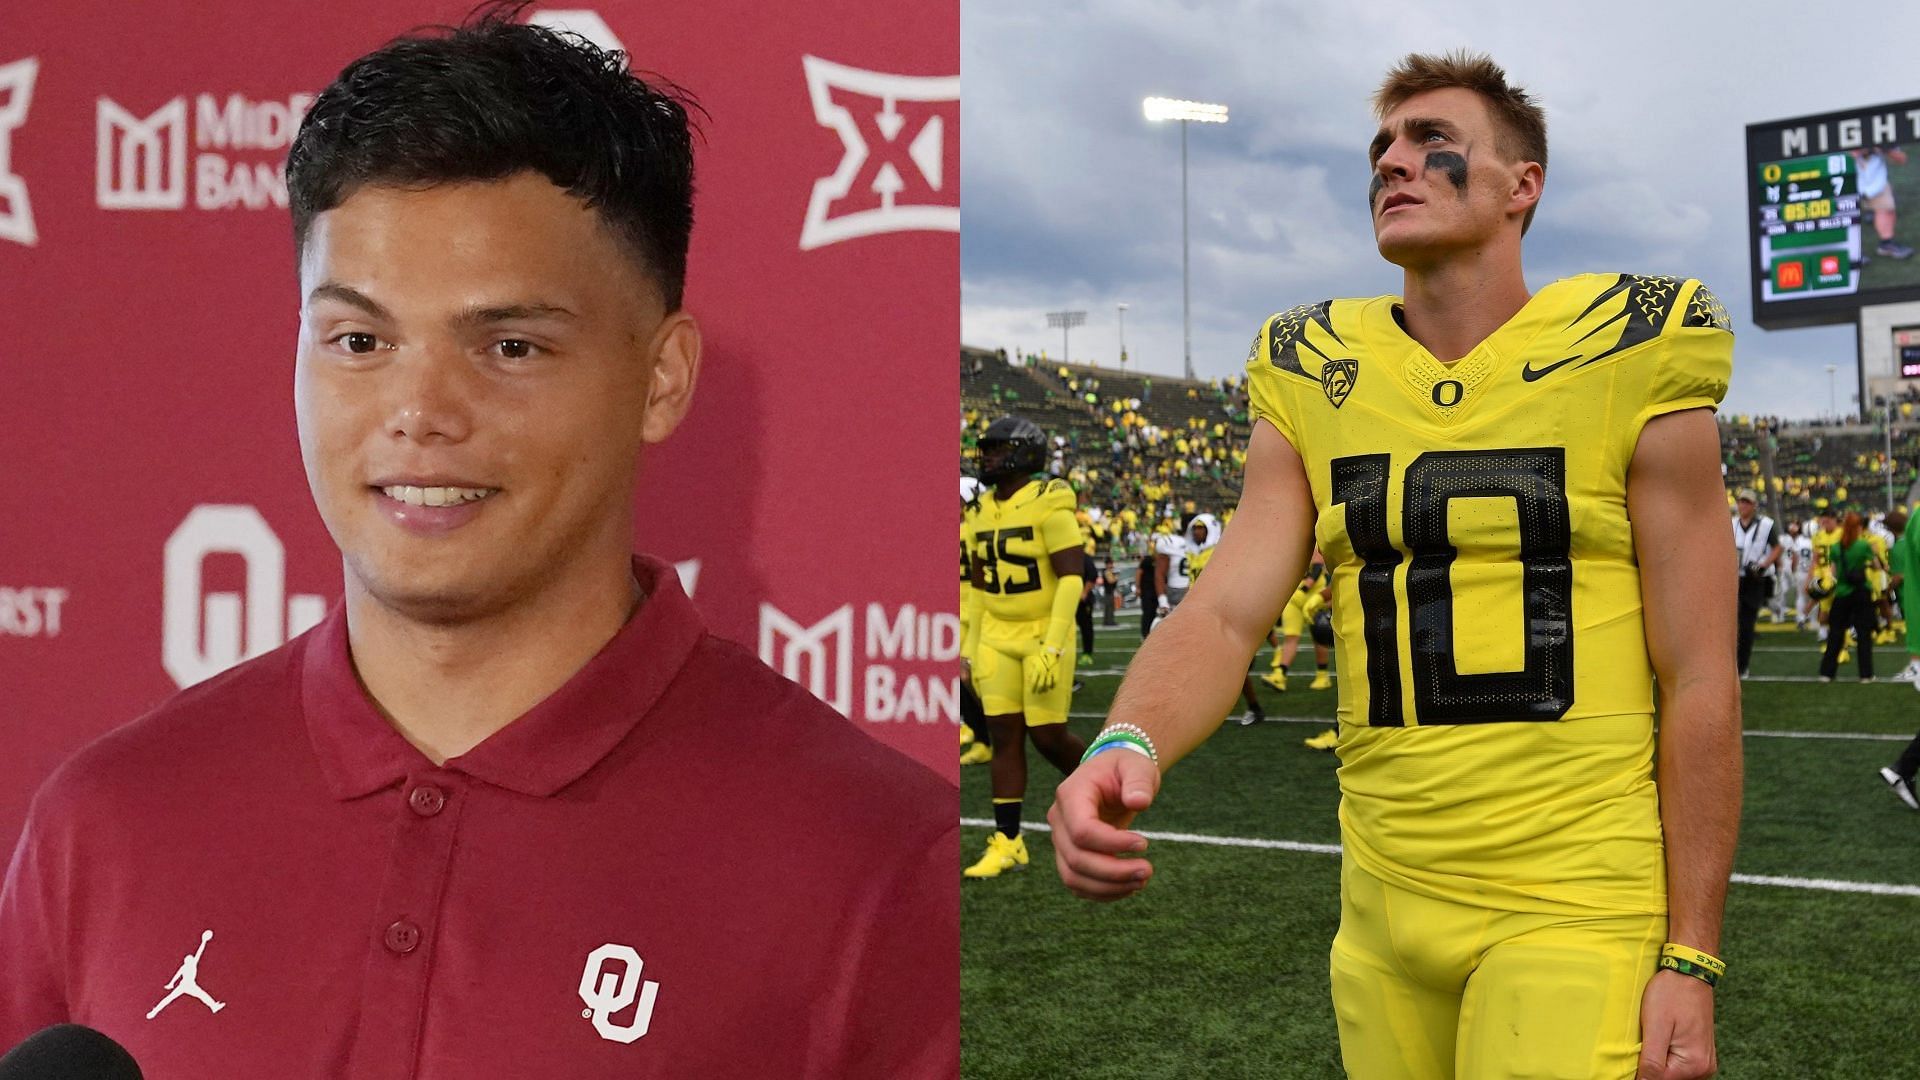 Oregon rumored to be going after Dillon Gabriel to replace Bo Nix 😳 #, College Football